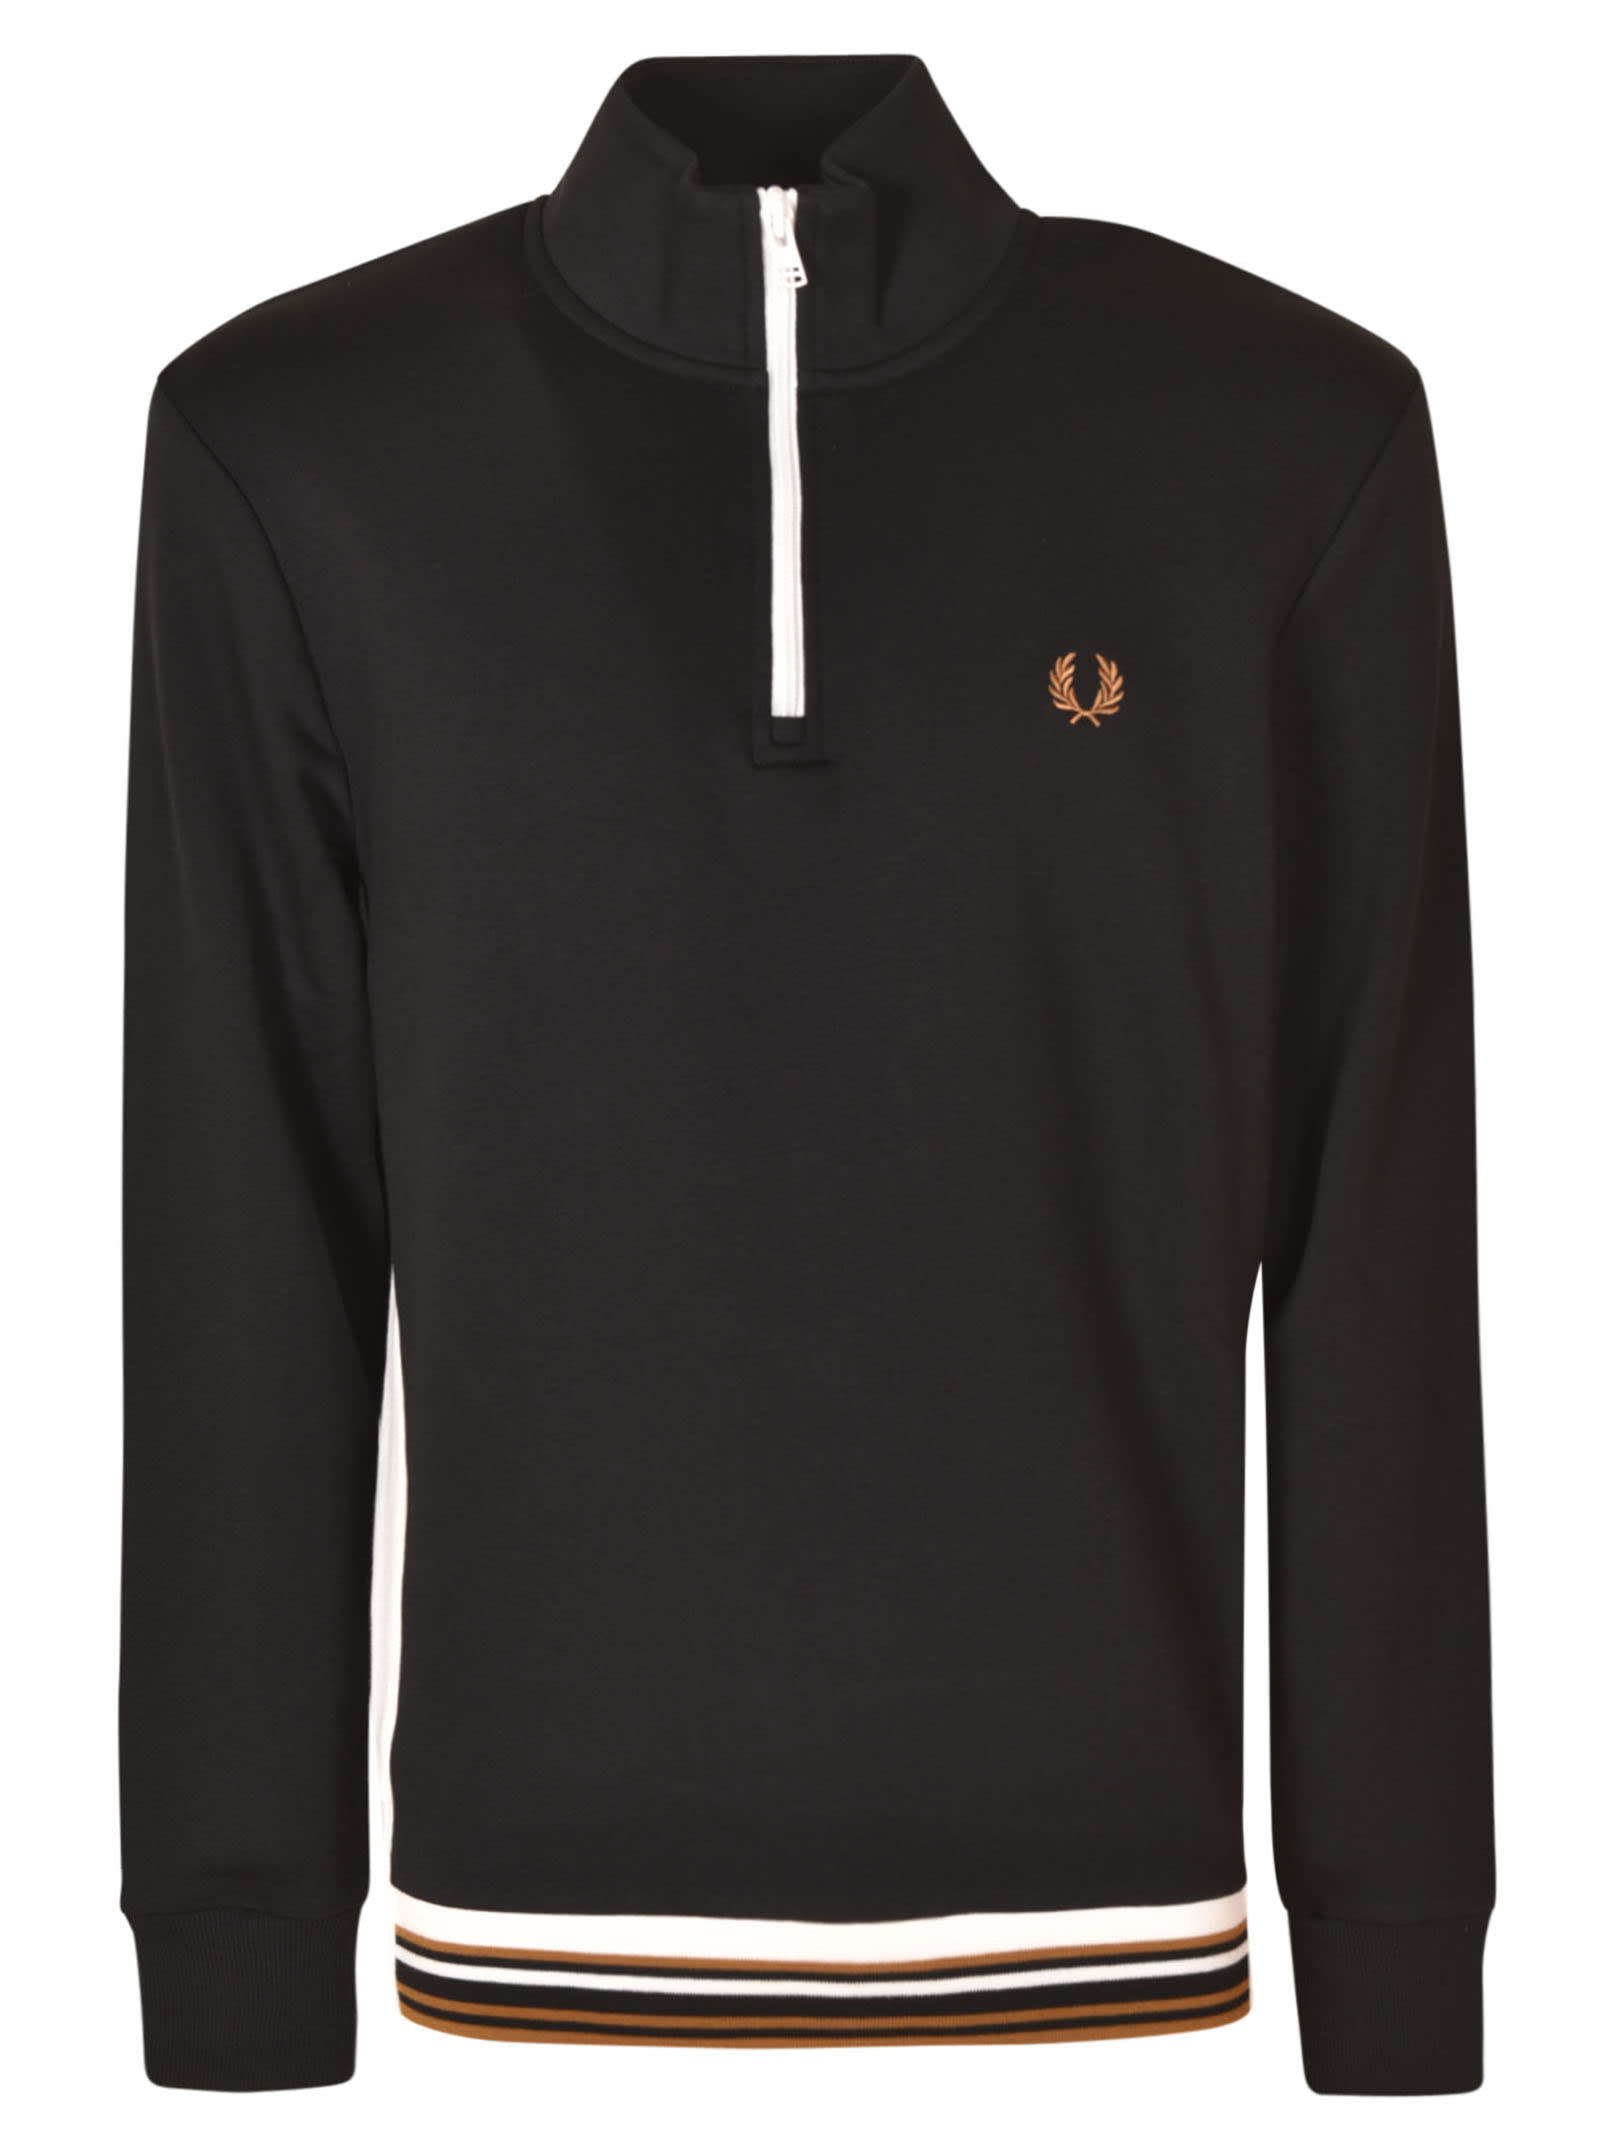 Fred Perry Contrast Panel Hlfzp Sweatshirt